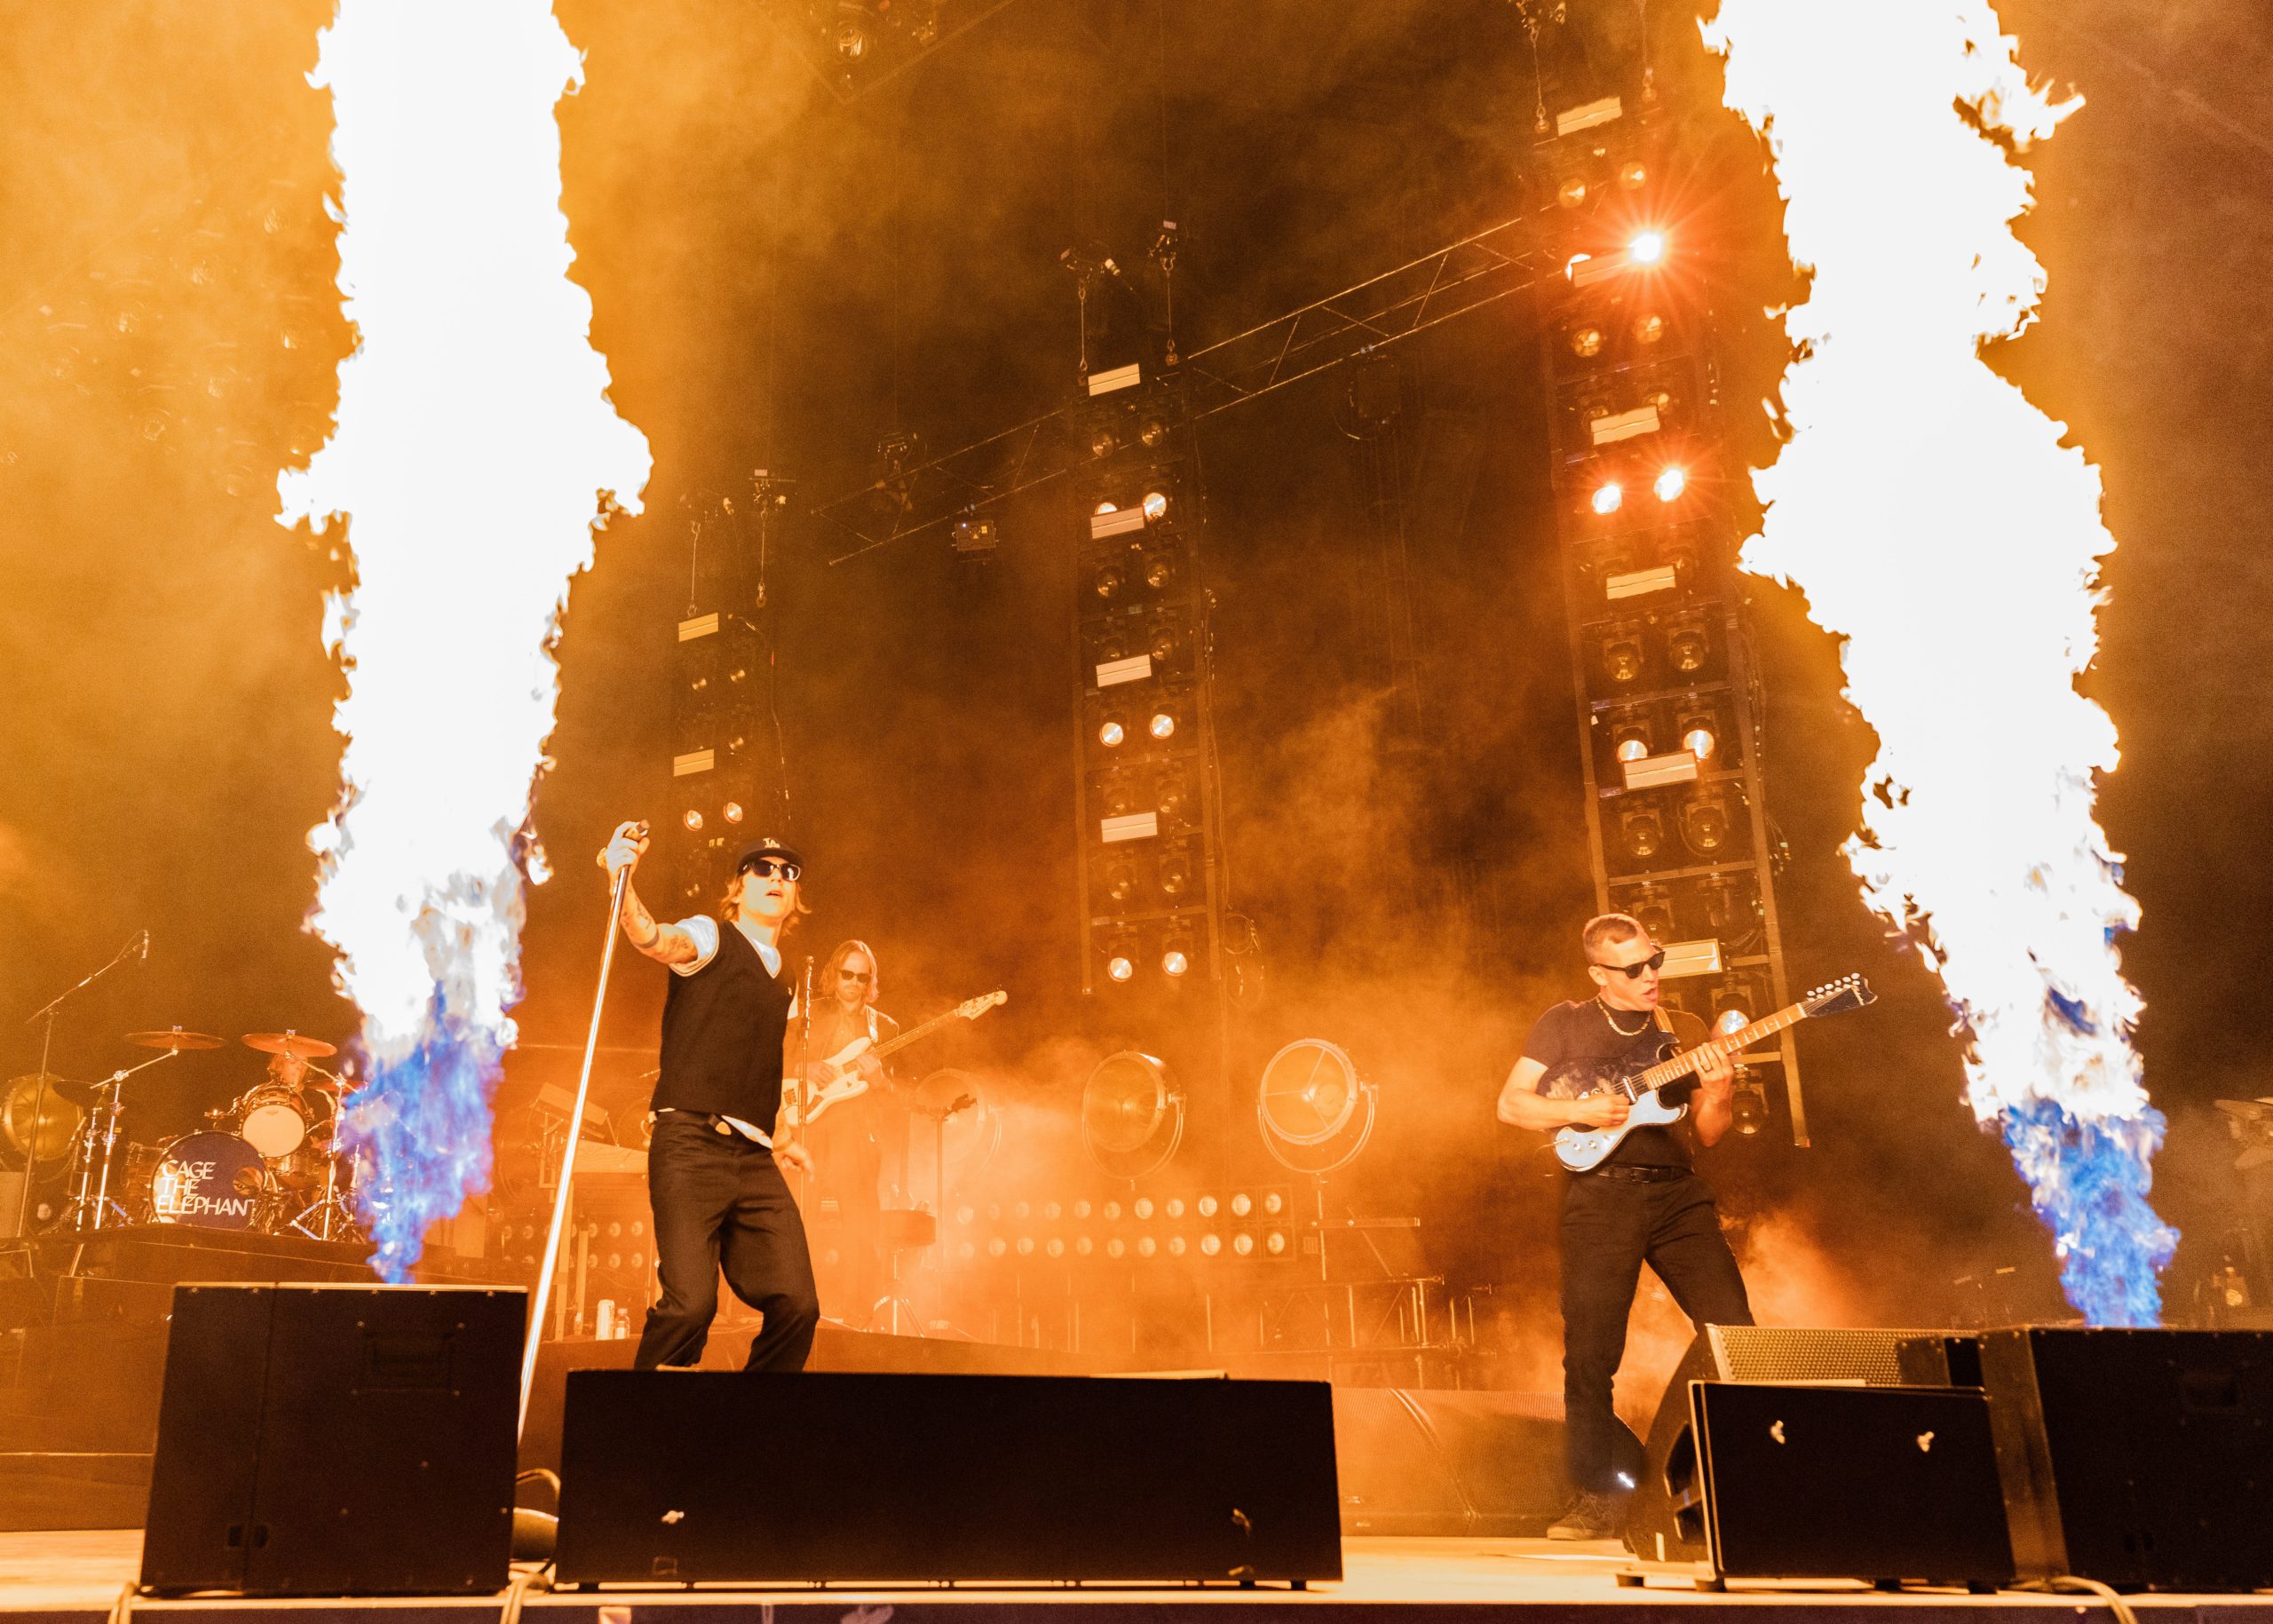 Flames shoot up from the front of the stage, emanating an intense heat as heads rock and hands fly in the air while the music blasts from Cage the Elephant. Photo: @lmsorenson